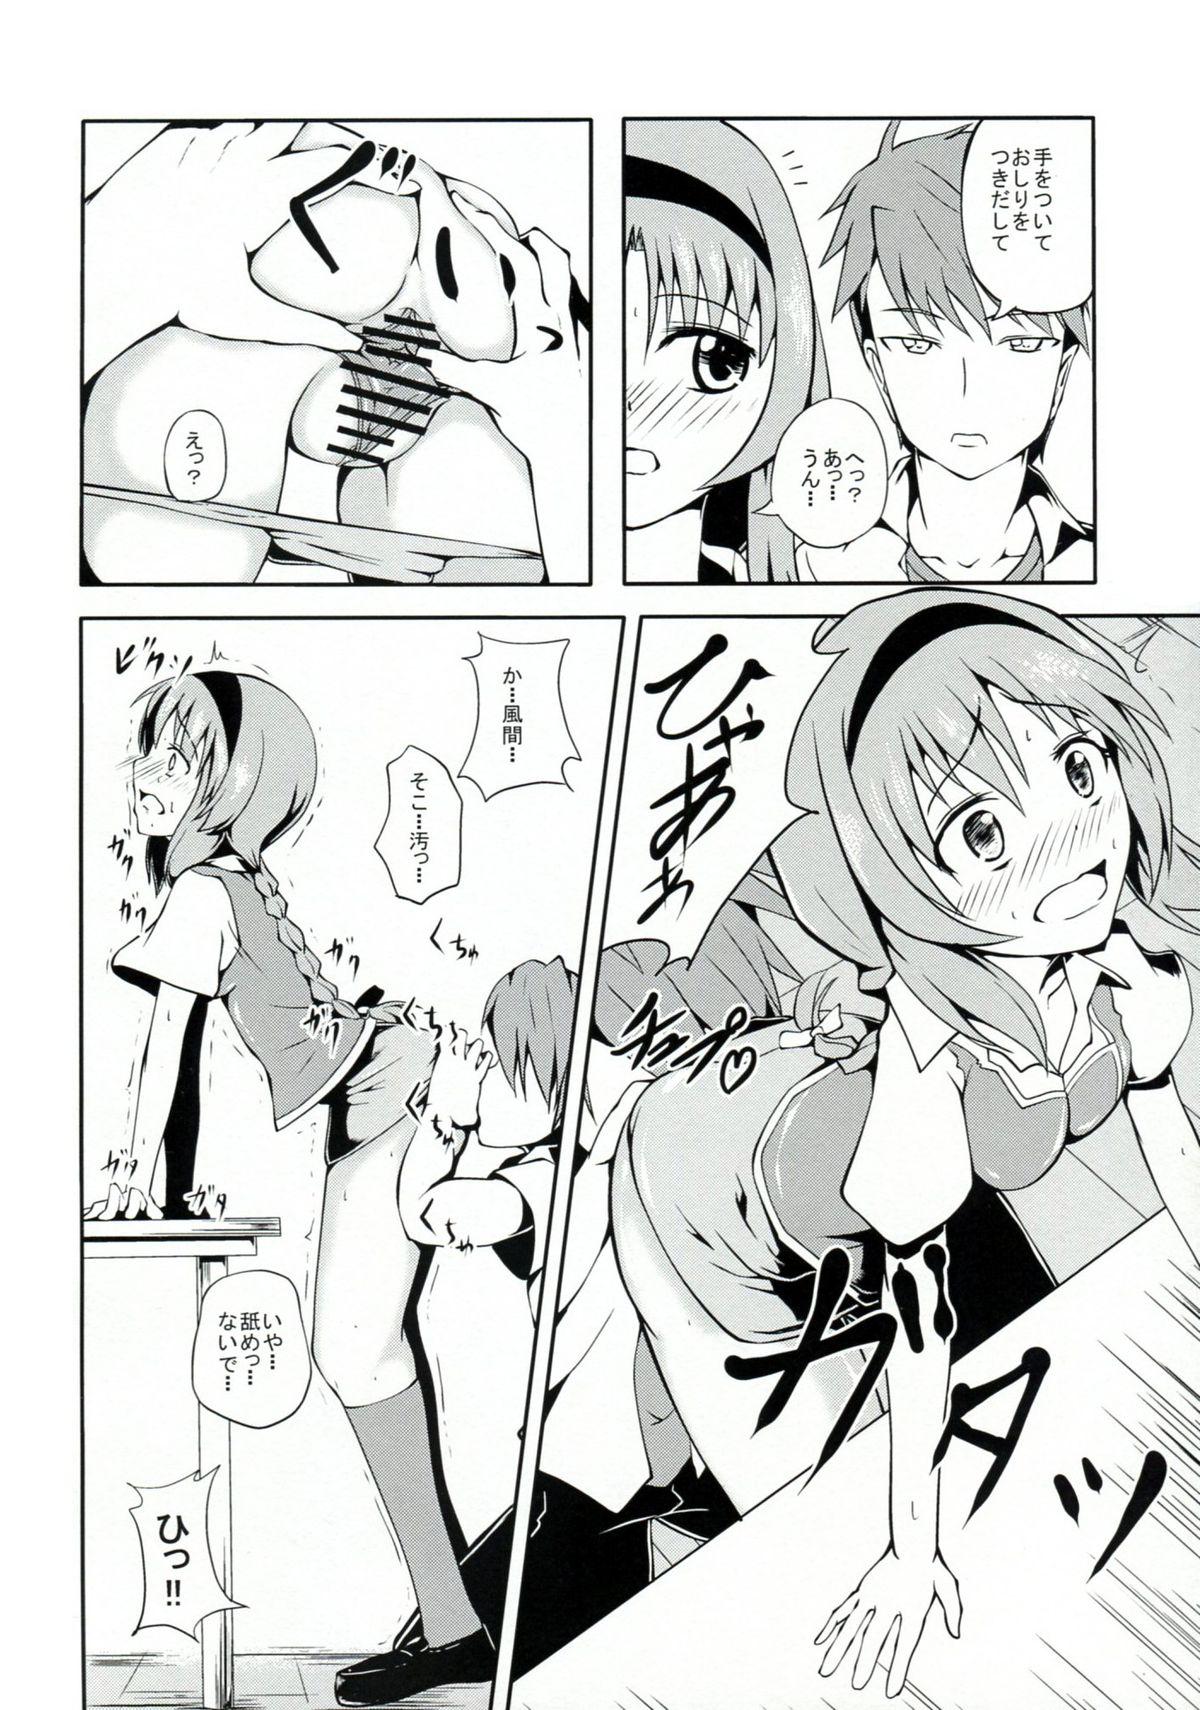 Harcore Takao Thunder - D-frag Brother - Page 7